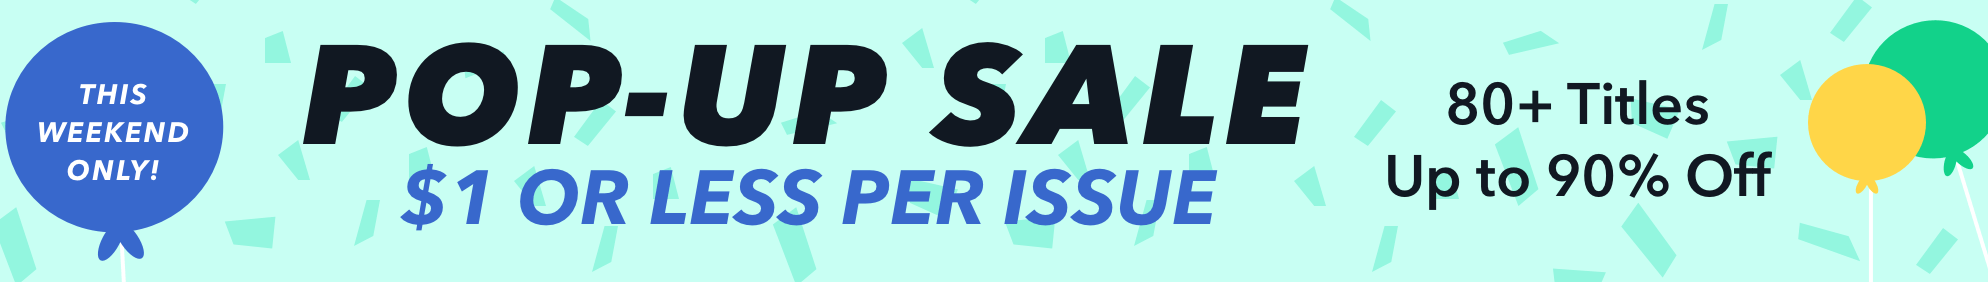 All Issues $1 or Less Oct 18 Aff